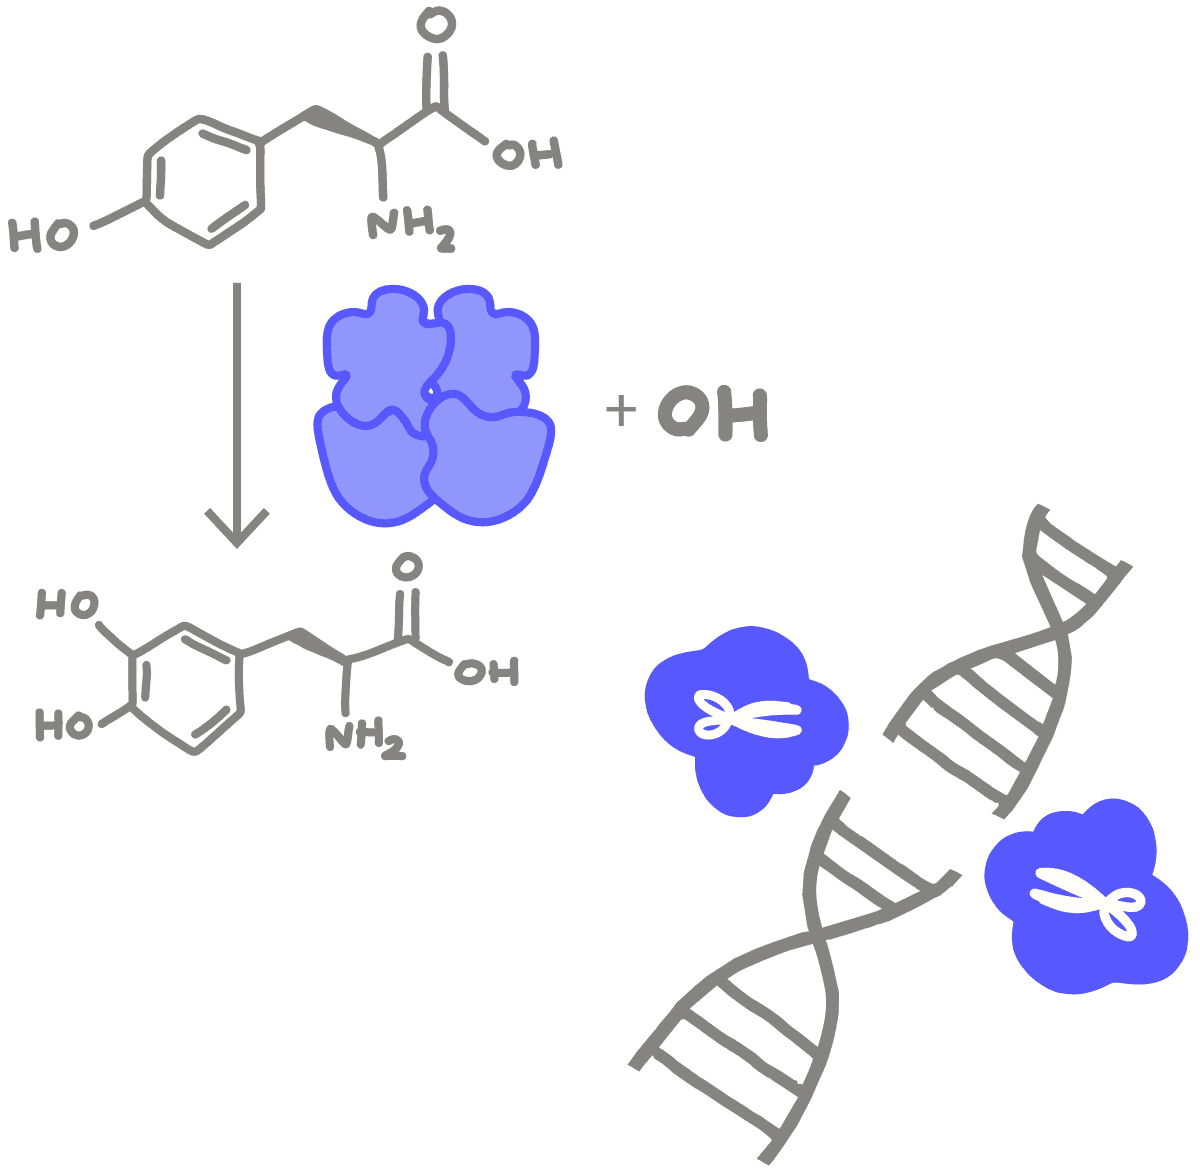 Image of an enzyme adding a hydroxyl group to the phenol ring of Tyrosine. DNA helix is cut in half by enzymes with scissors.